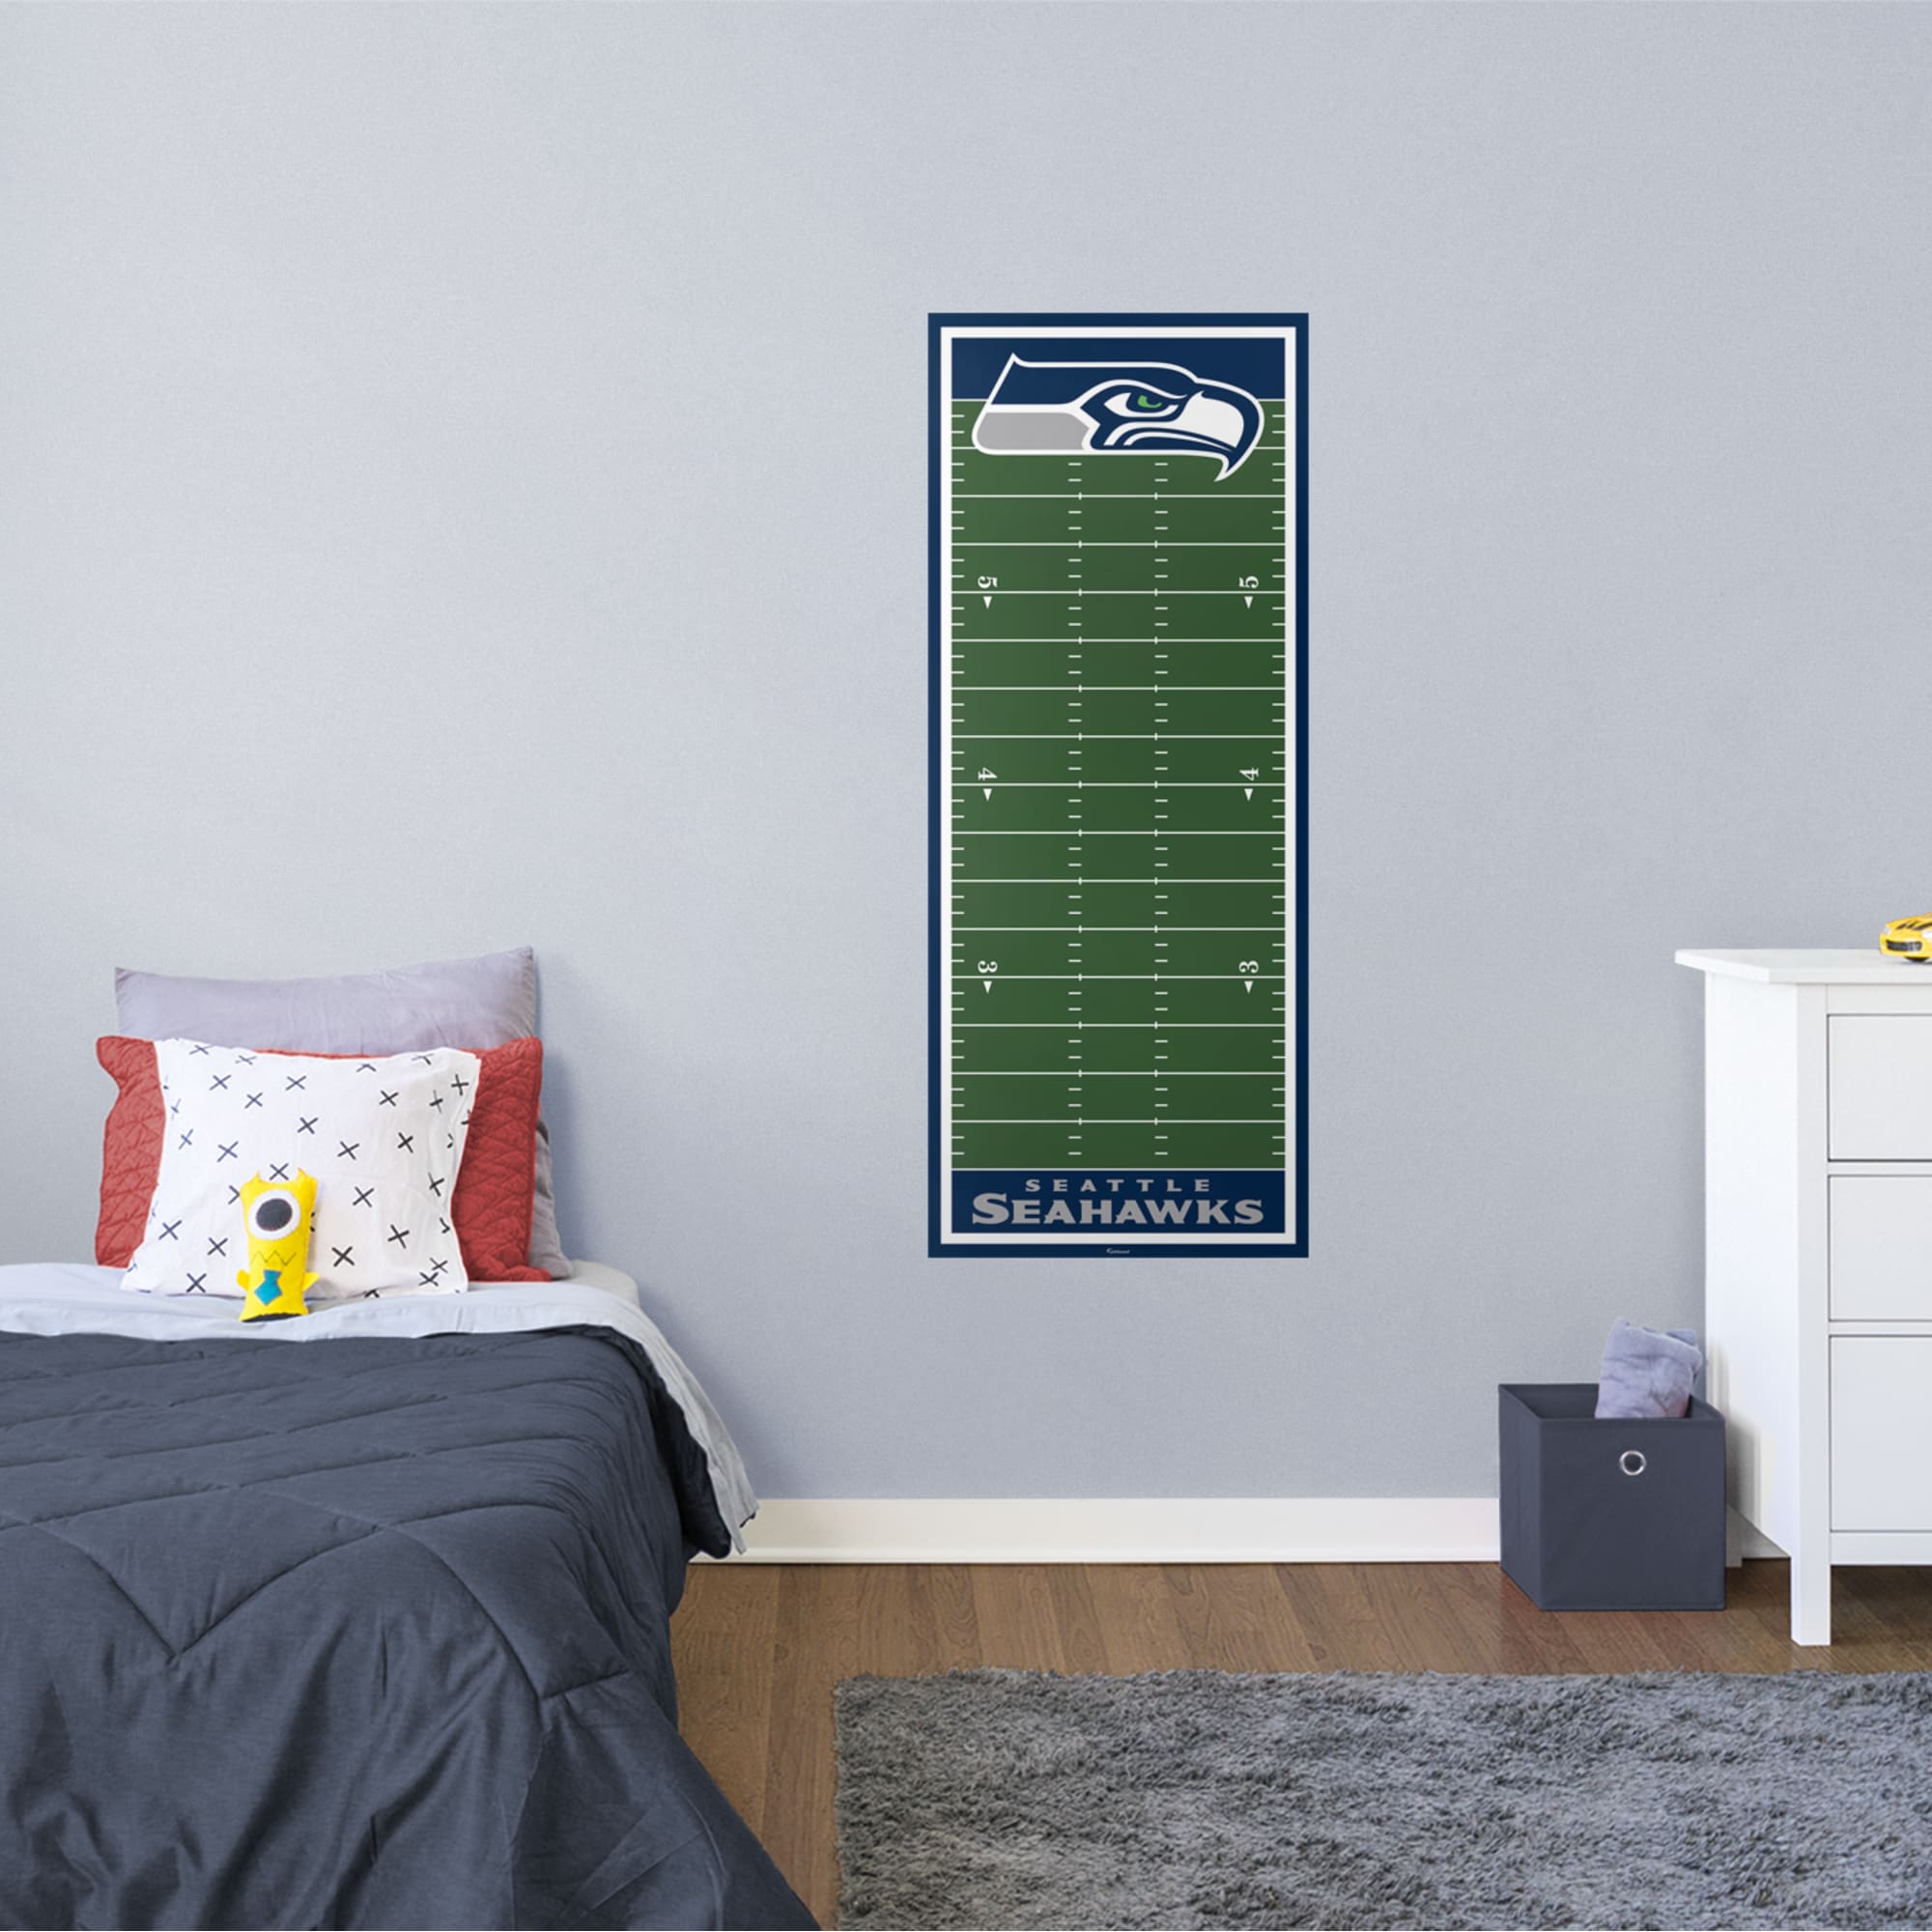 Seattle Seahawks: Growth Chart - Officially Licensed NFL Removable Wall Graphic 24.0"W x 59.0"H by Fathead | Vinyl